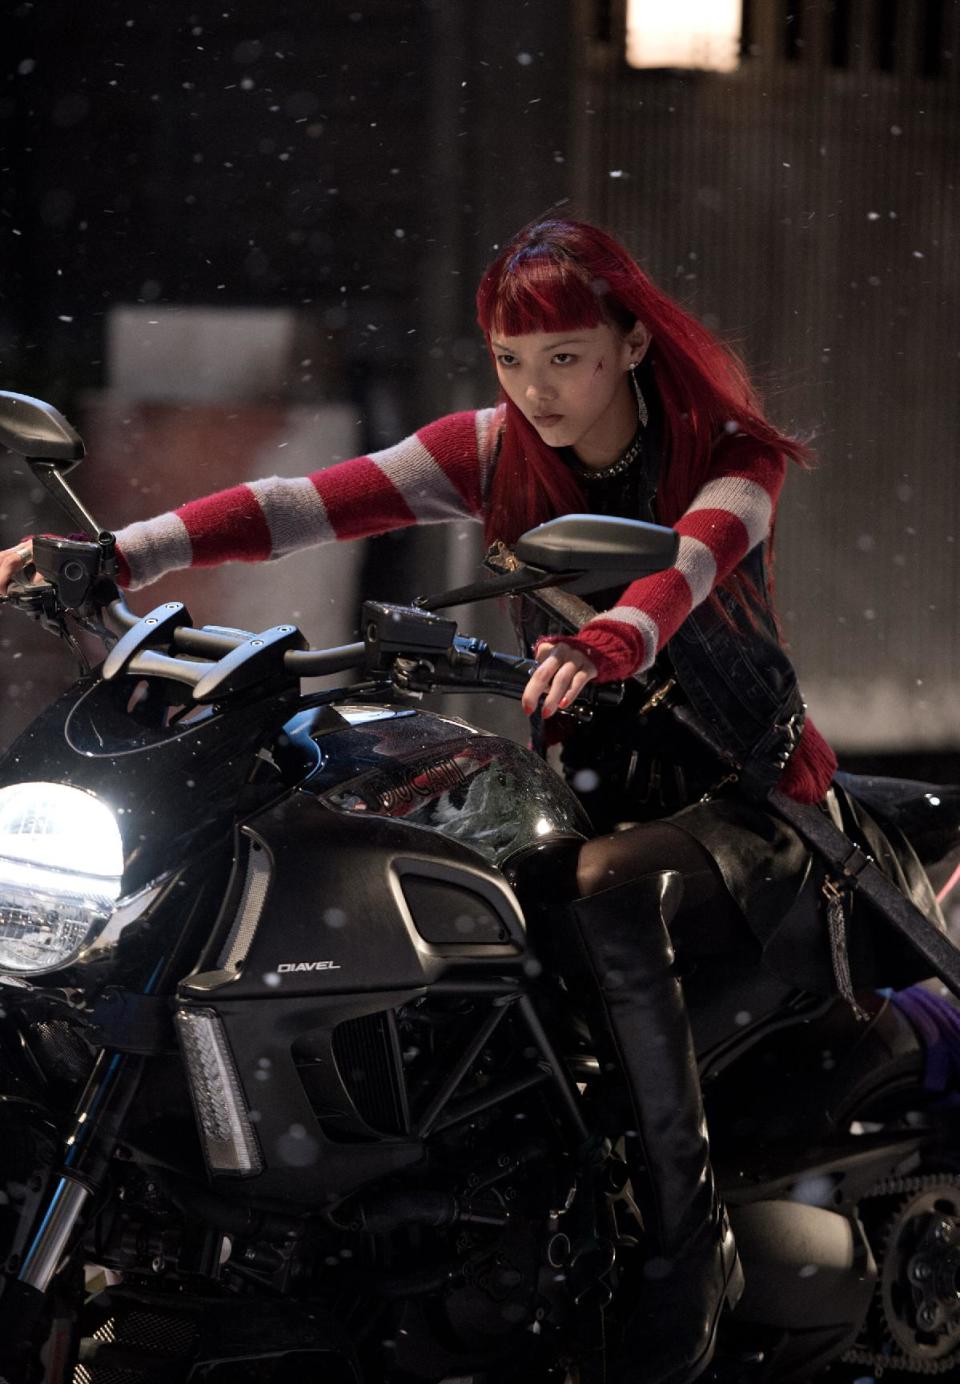 This publicity image released by 20th Century Fox shows Rila Fukushima in a scene from "The Wolverine." (AP Photo/20th Century Fox, Ben Rothstein)